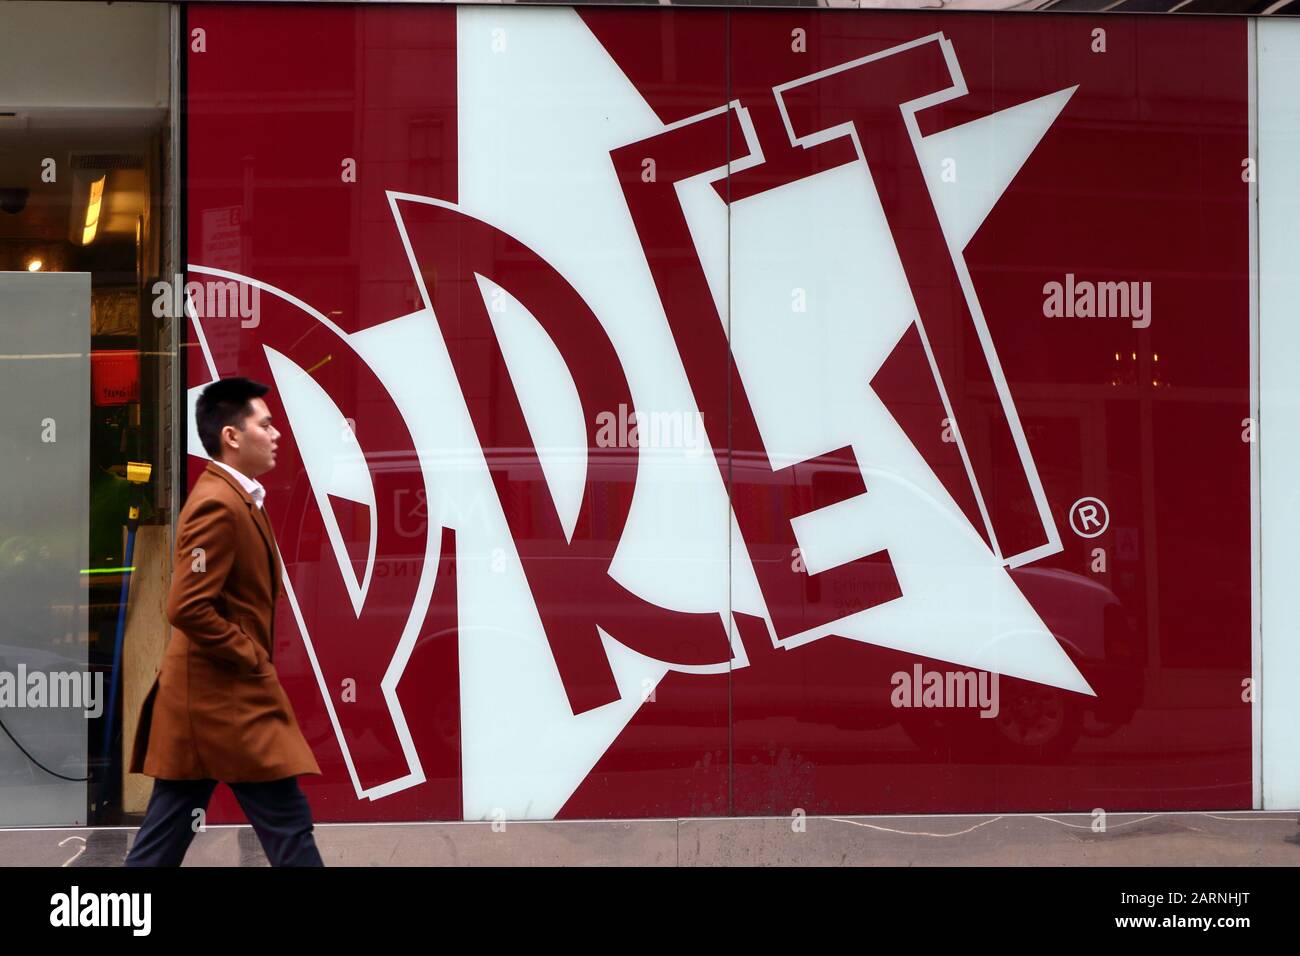 A person walks by a giant Pret A Manger logo at a shop in New York, NY. Stock Photo